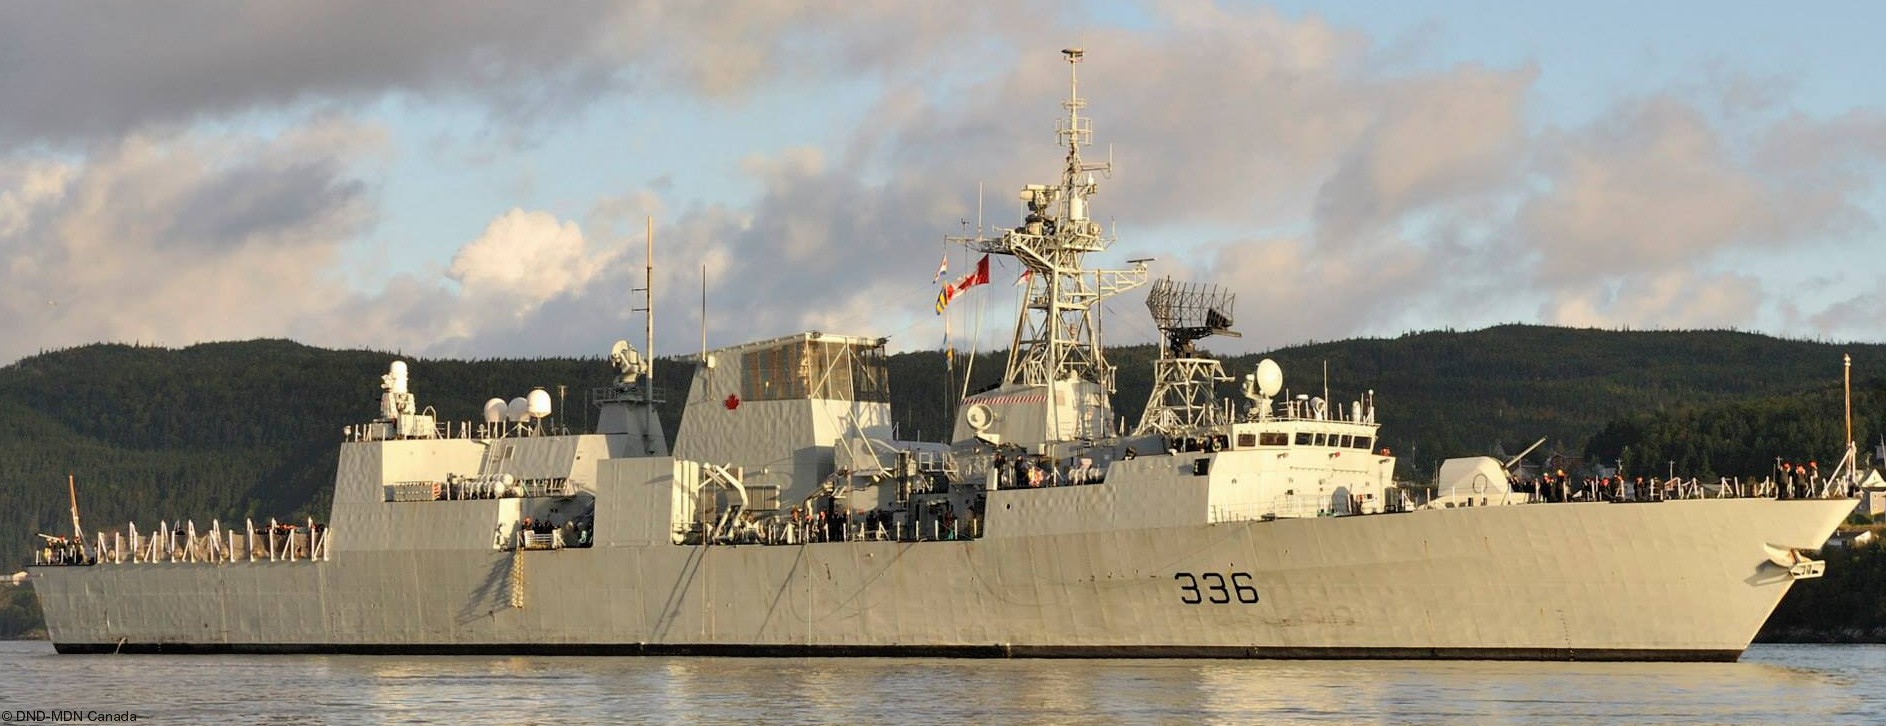 ffh-336 hmcs montreal halifax class helicopter patrol frigate ncsm royal canadian navy 19